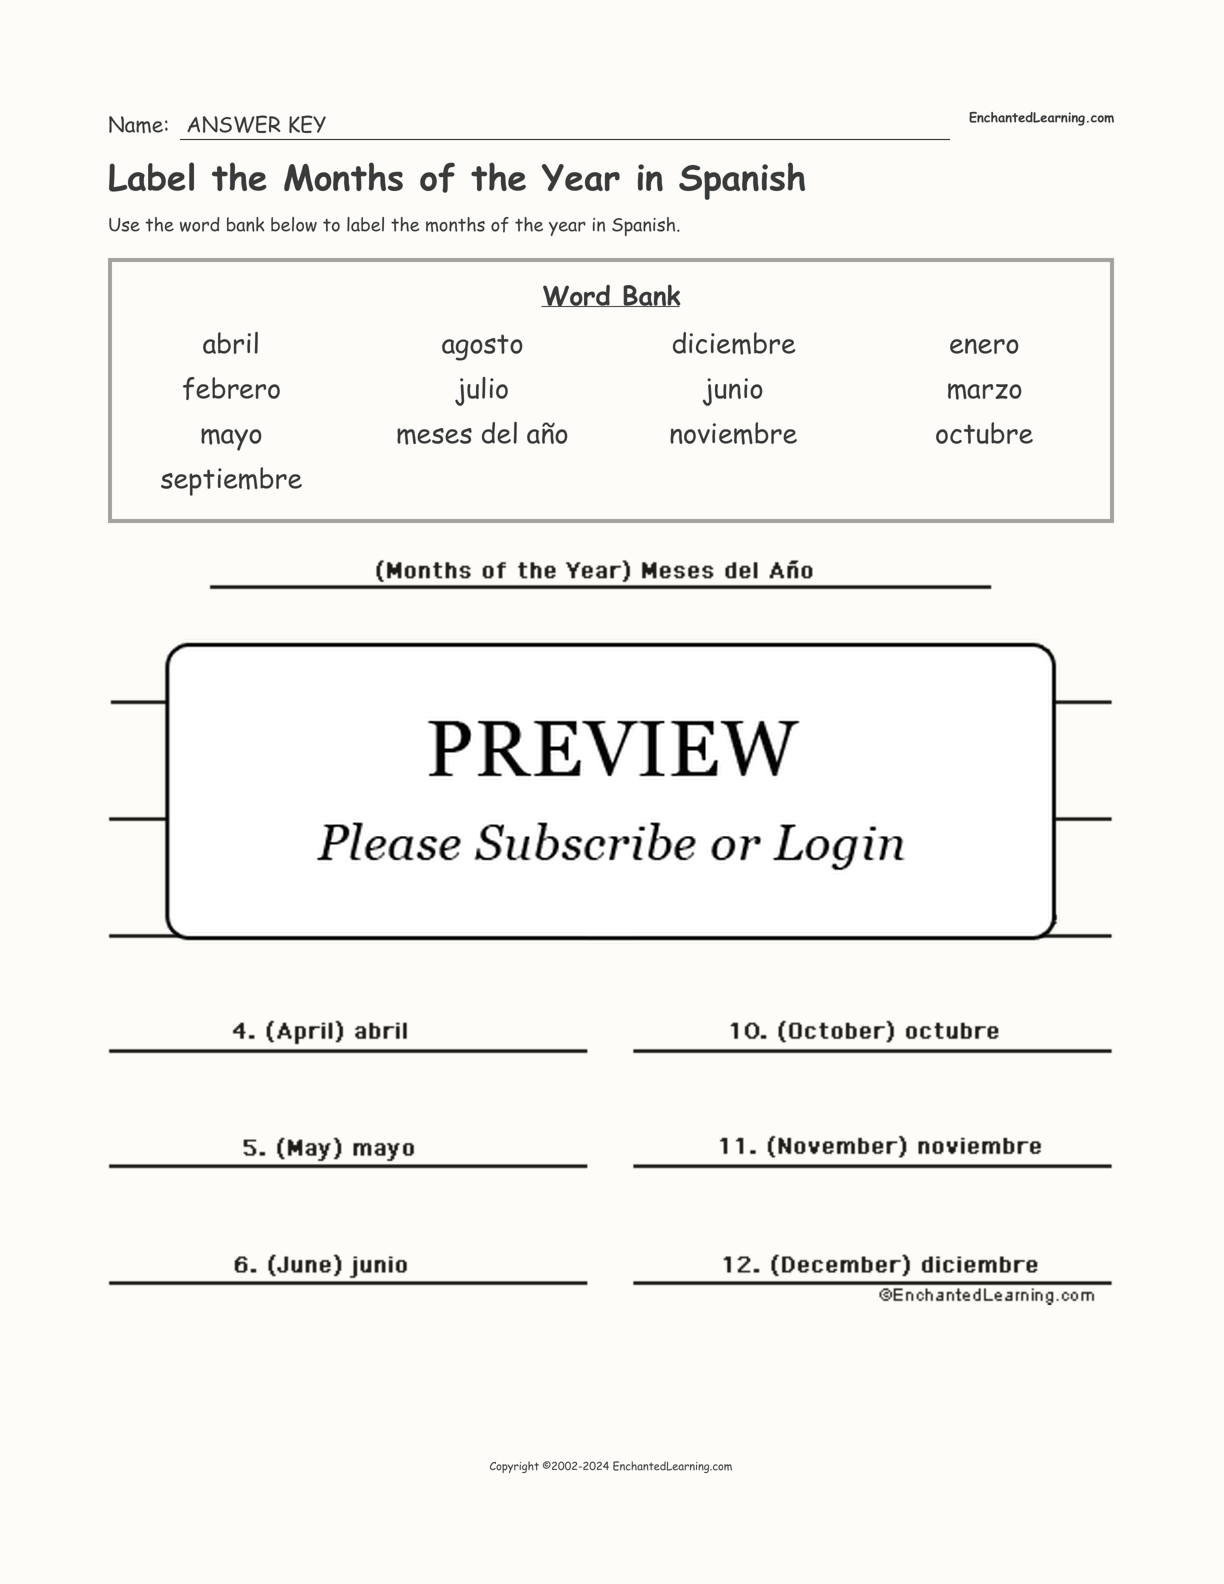 Label the Months of the Year in Spanish interactive worksheet page 2